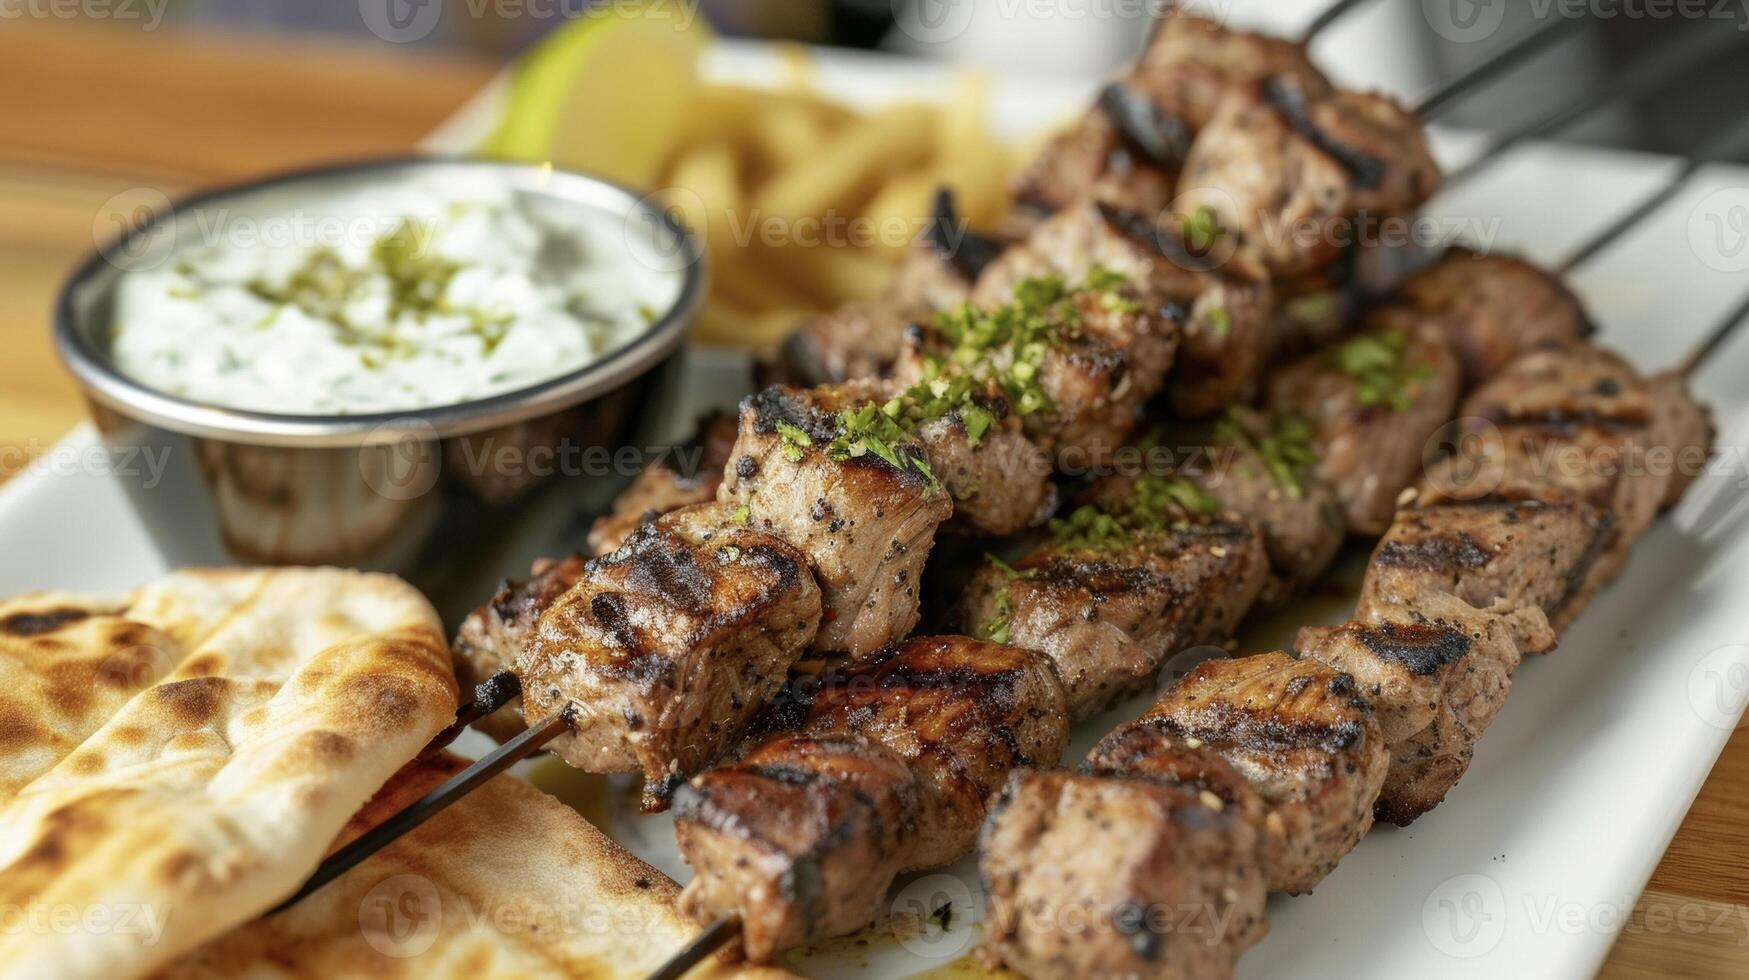 Grilled to perfection these delectable skewered souvlaki meats are a staple dish in Greek cuisine. The traditional pita bread and cool tzatziki sauce perfectly complemen photo